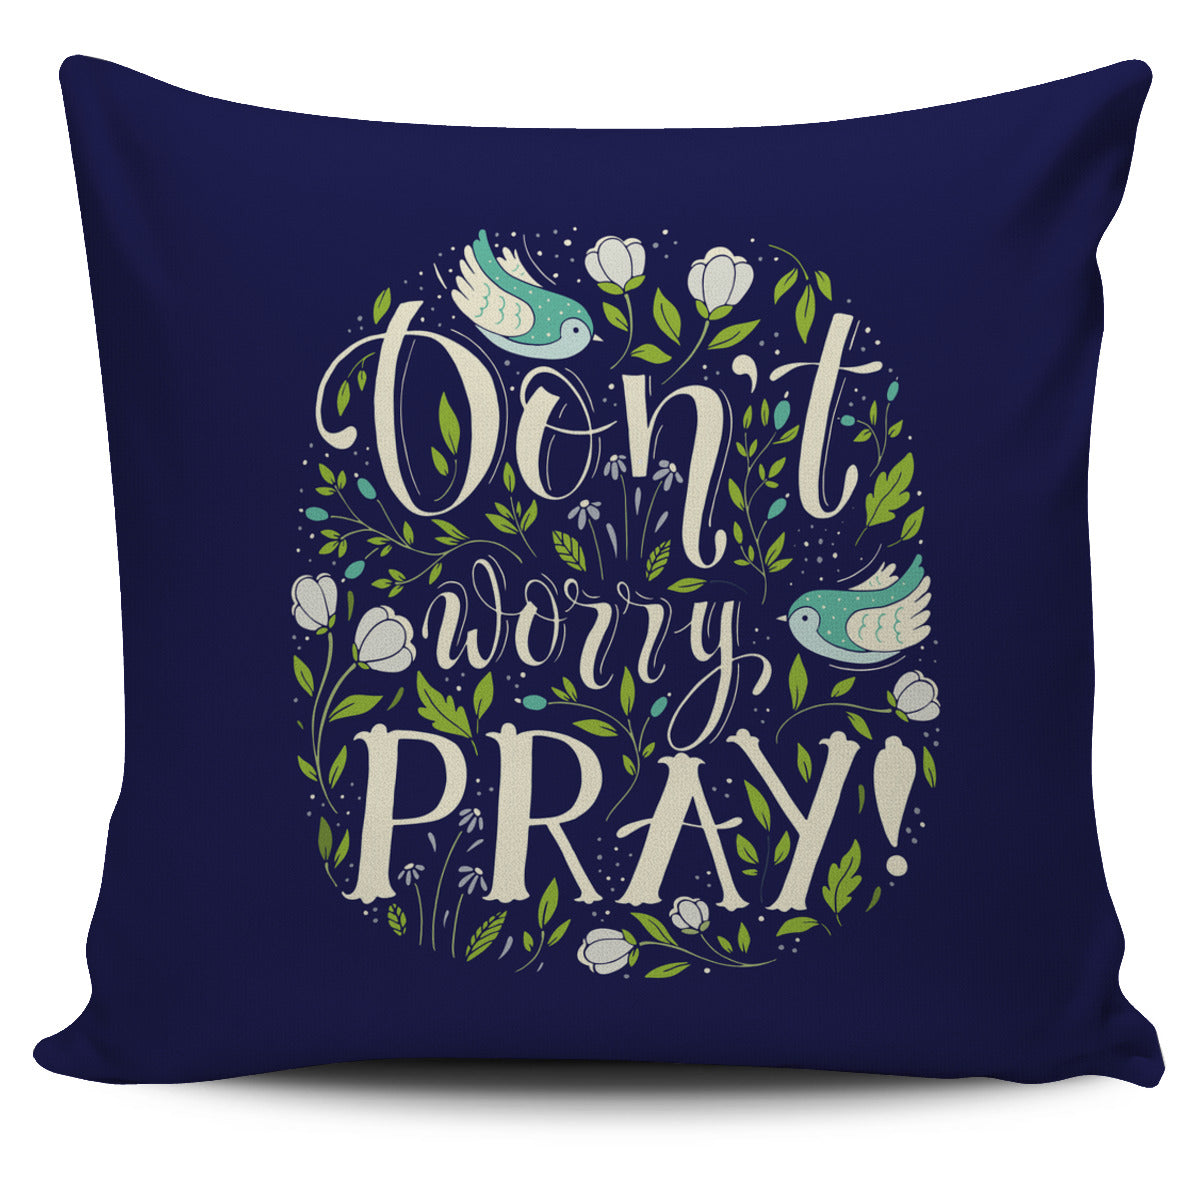 Don't Worry Pray Pillow Cover